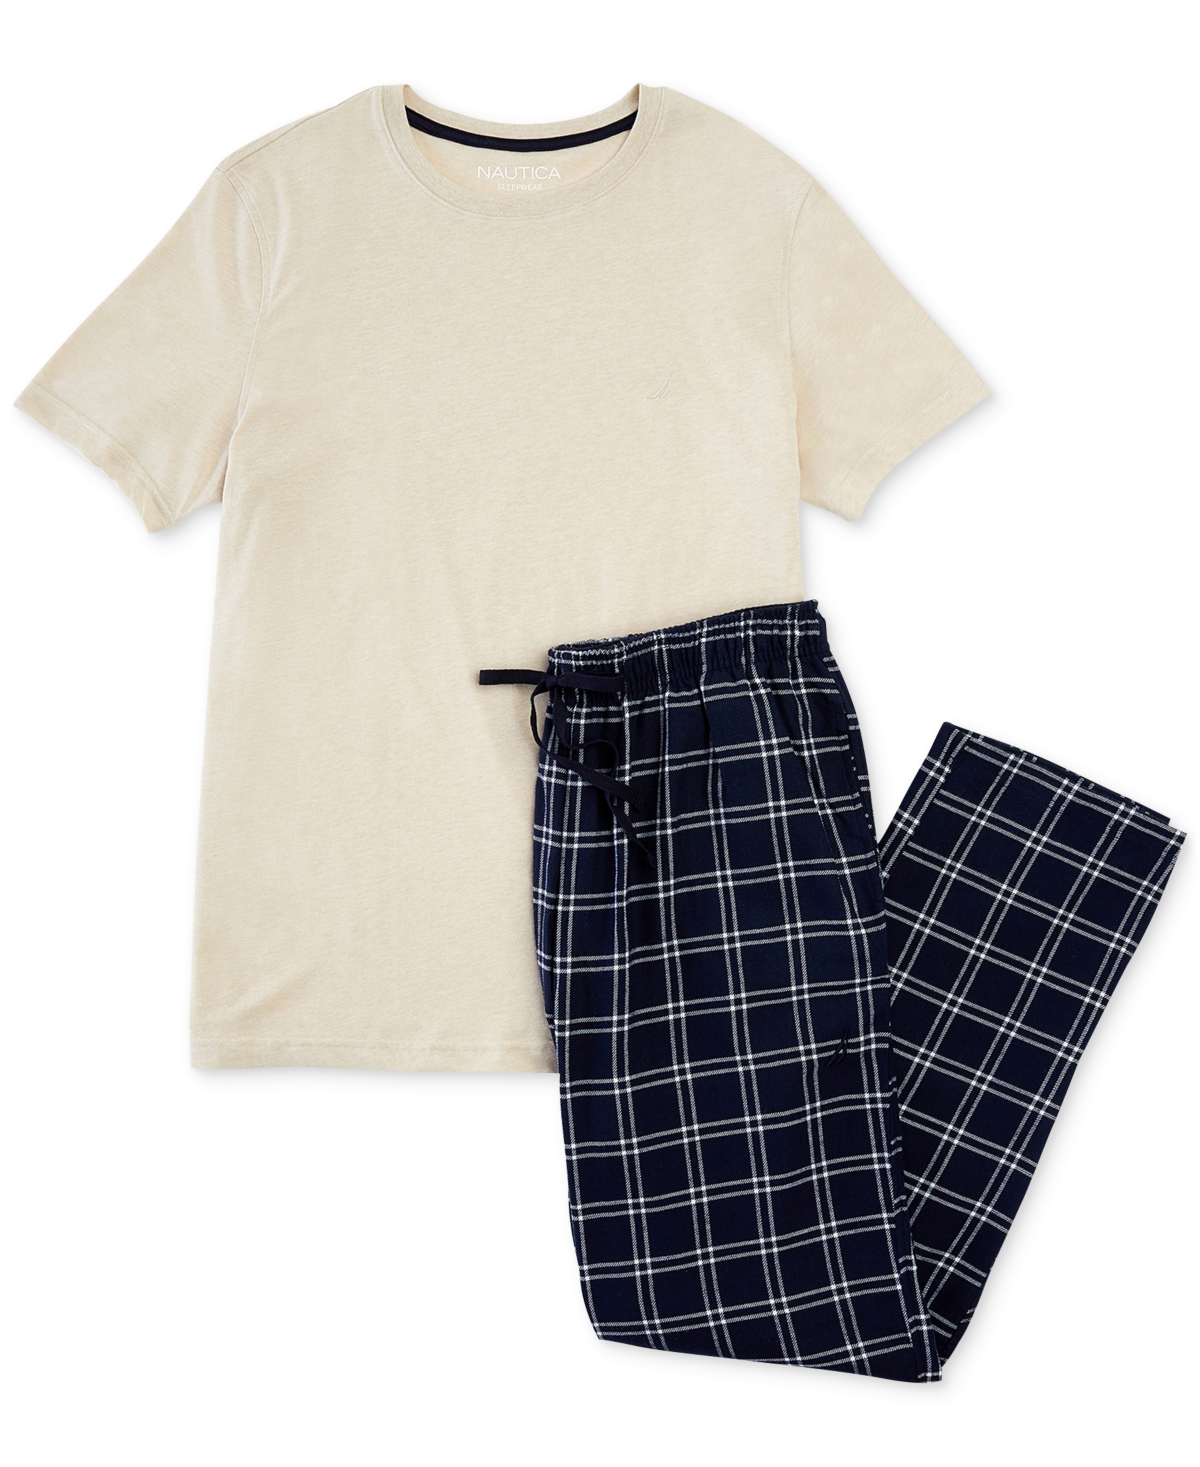 Nautica Men's 2-pc. Classic-fit Solid T-shirt & Plaid Flannel Pajama Pants Set In Oatmeal Heather